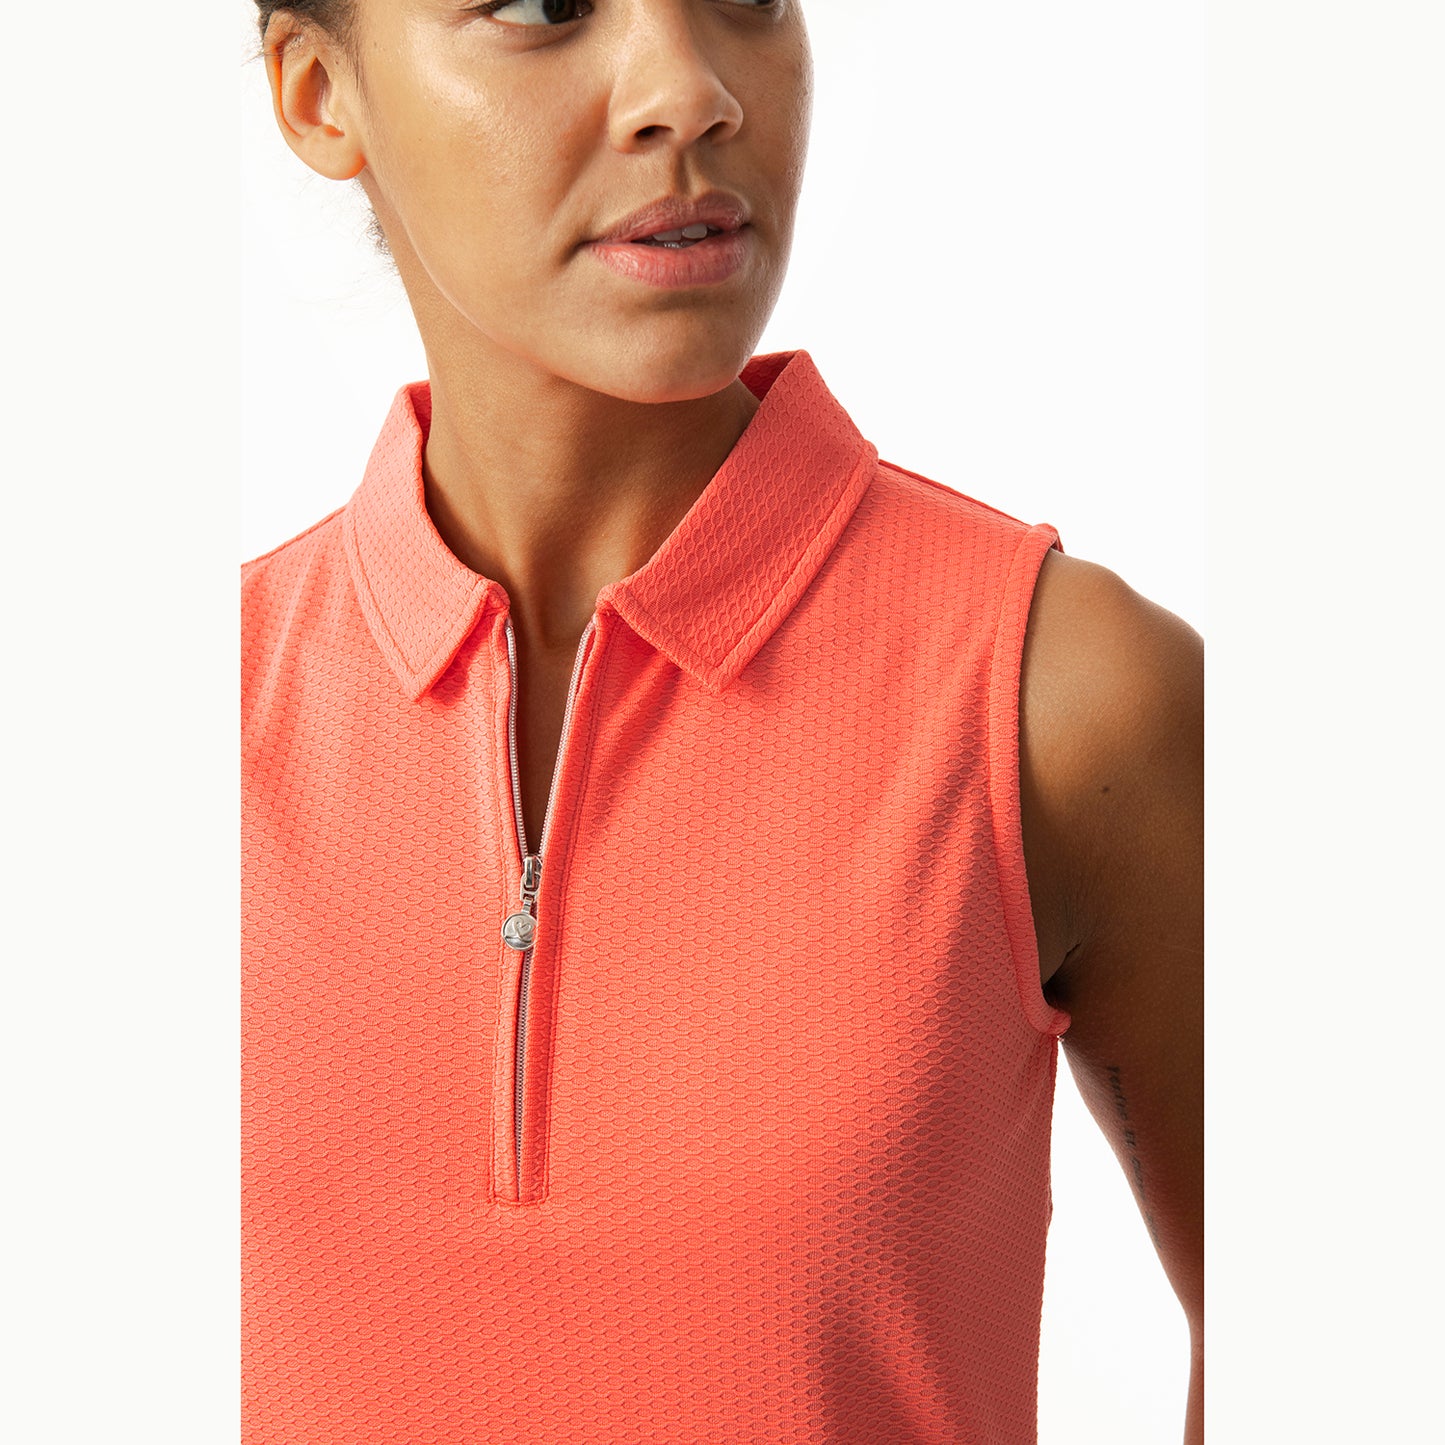 Daily Sports Honeycomb Structured Sleeveless Golf Polo Shirt in Coral